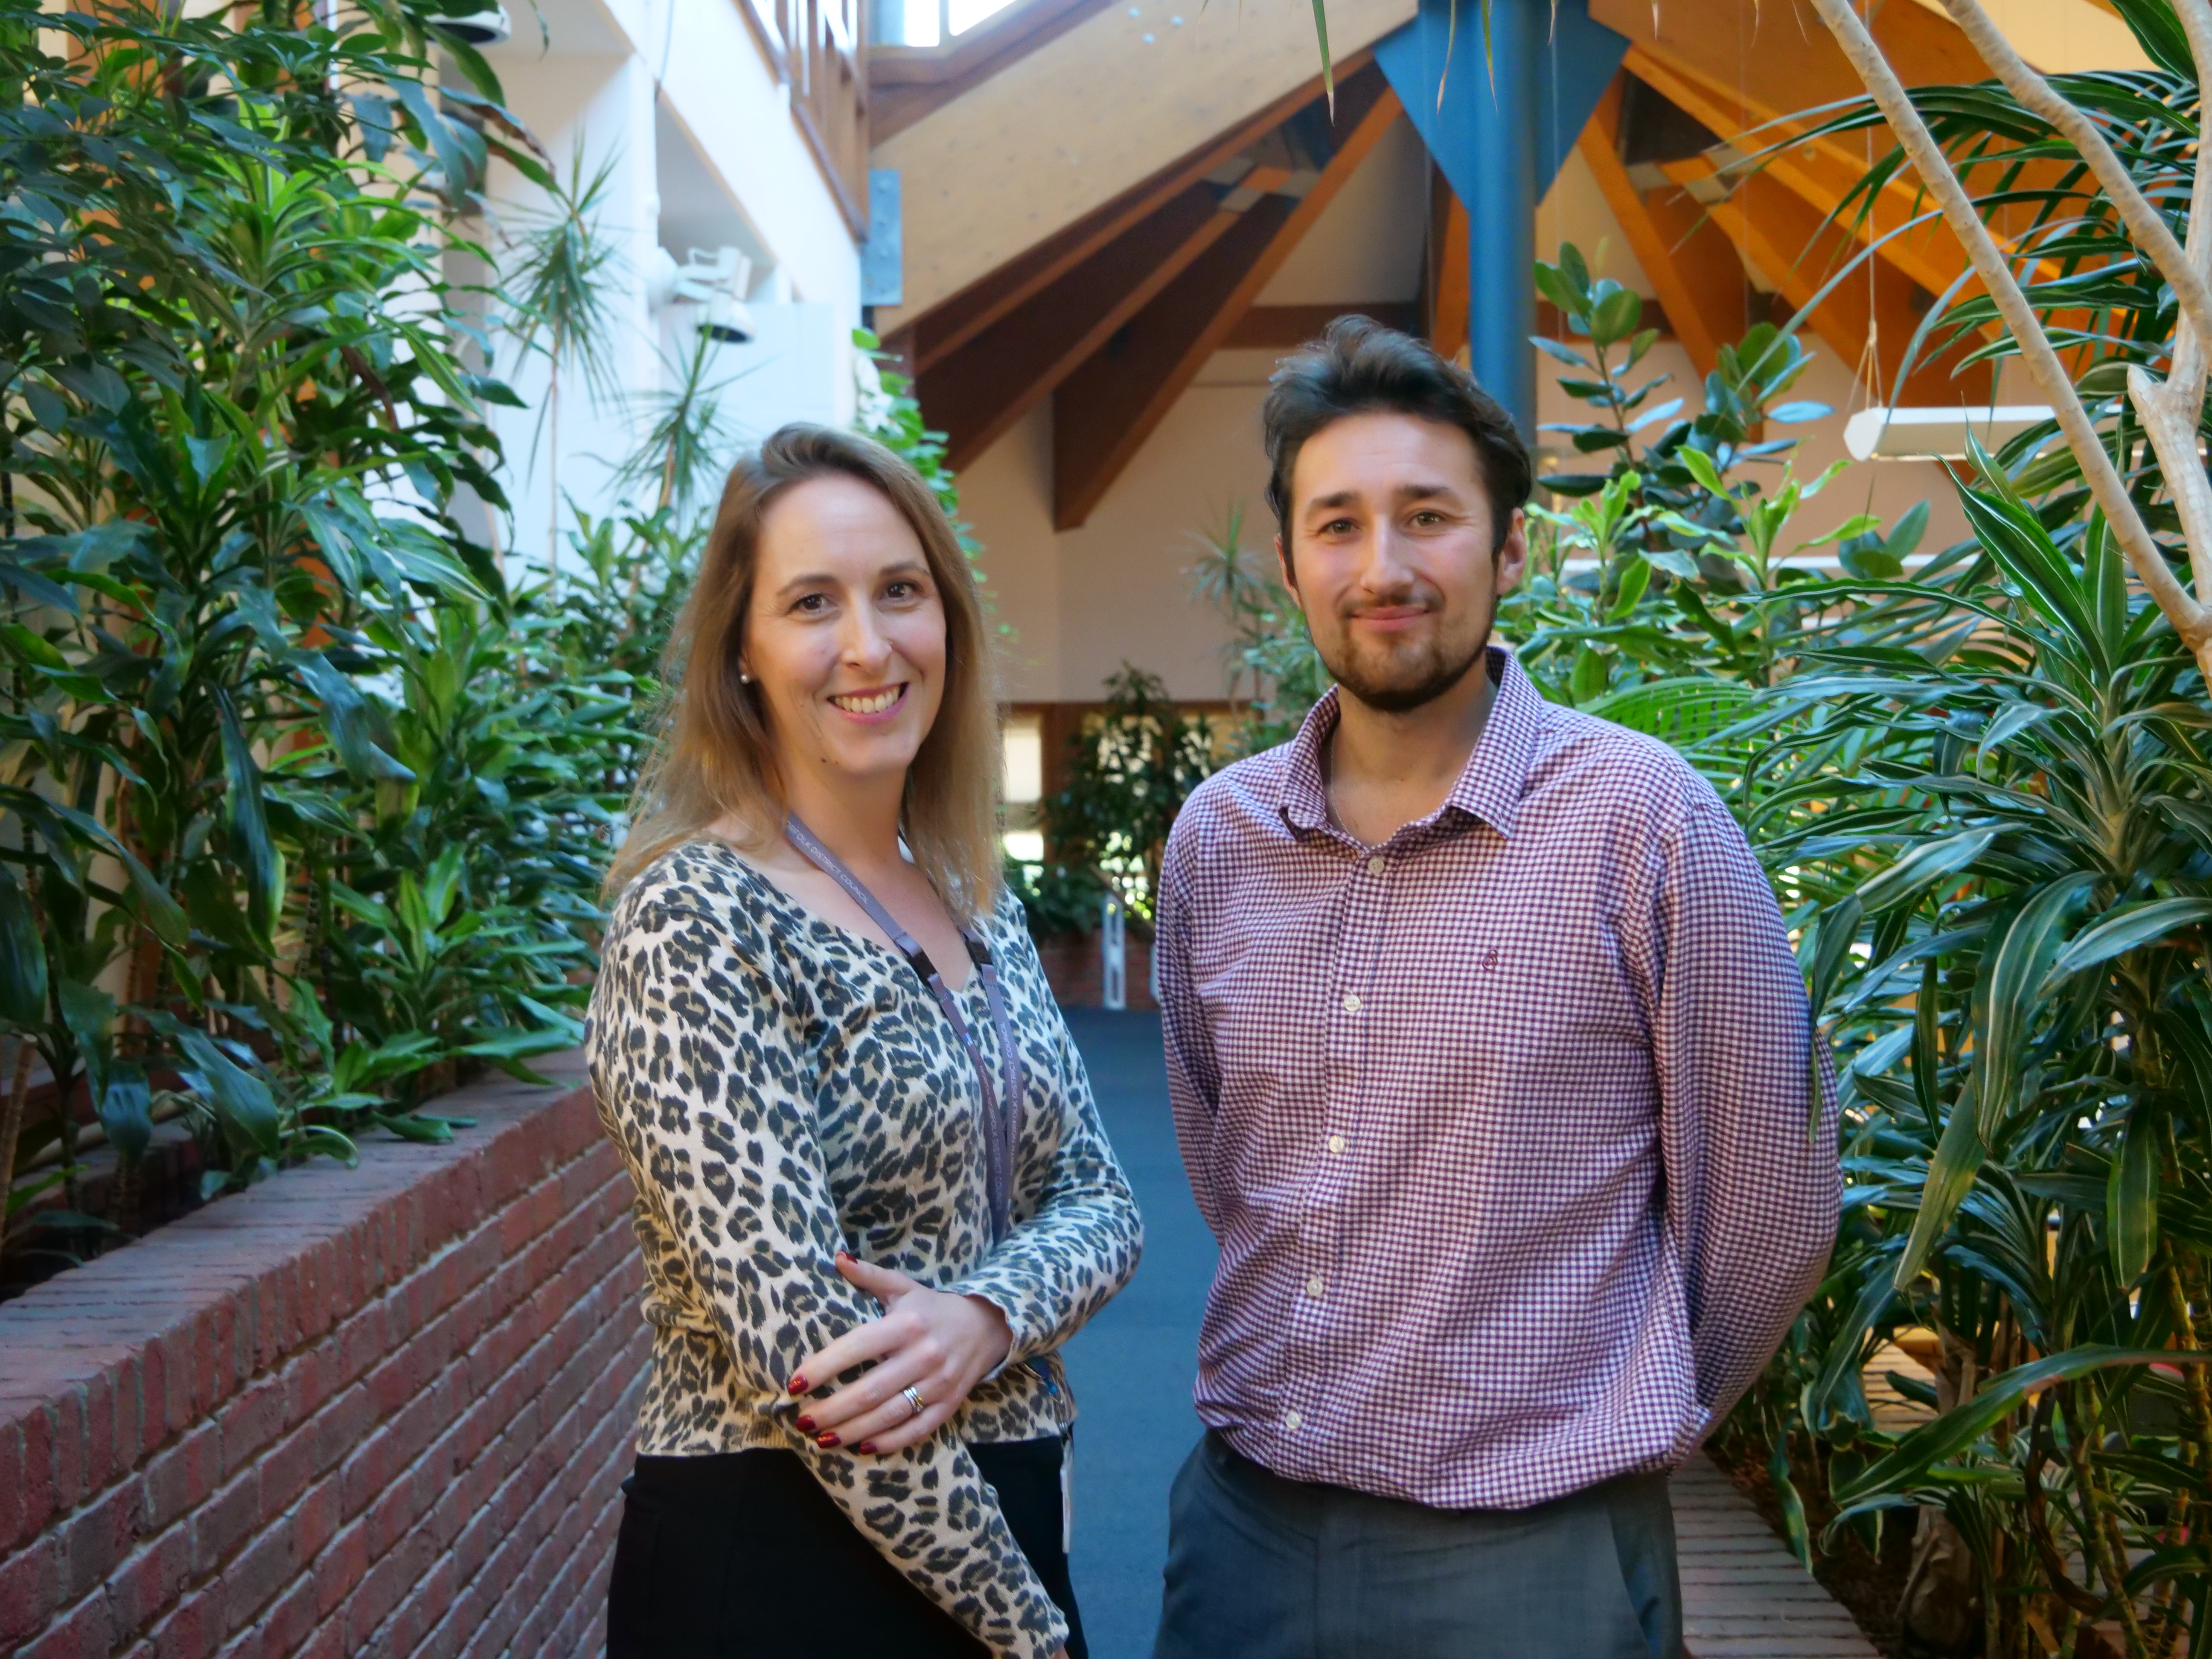 Our Financial Inclusion Team, Suzanne Howes and Harvey Smith